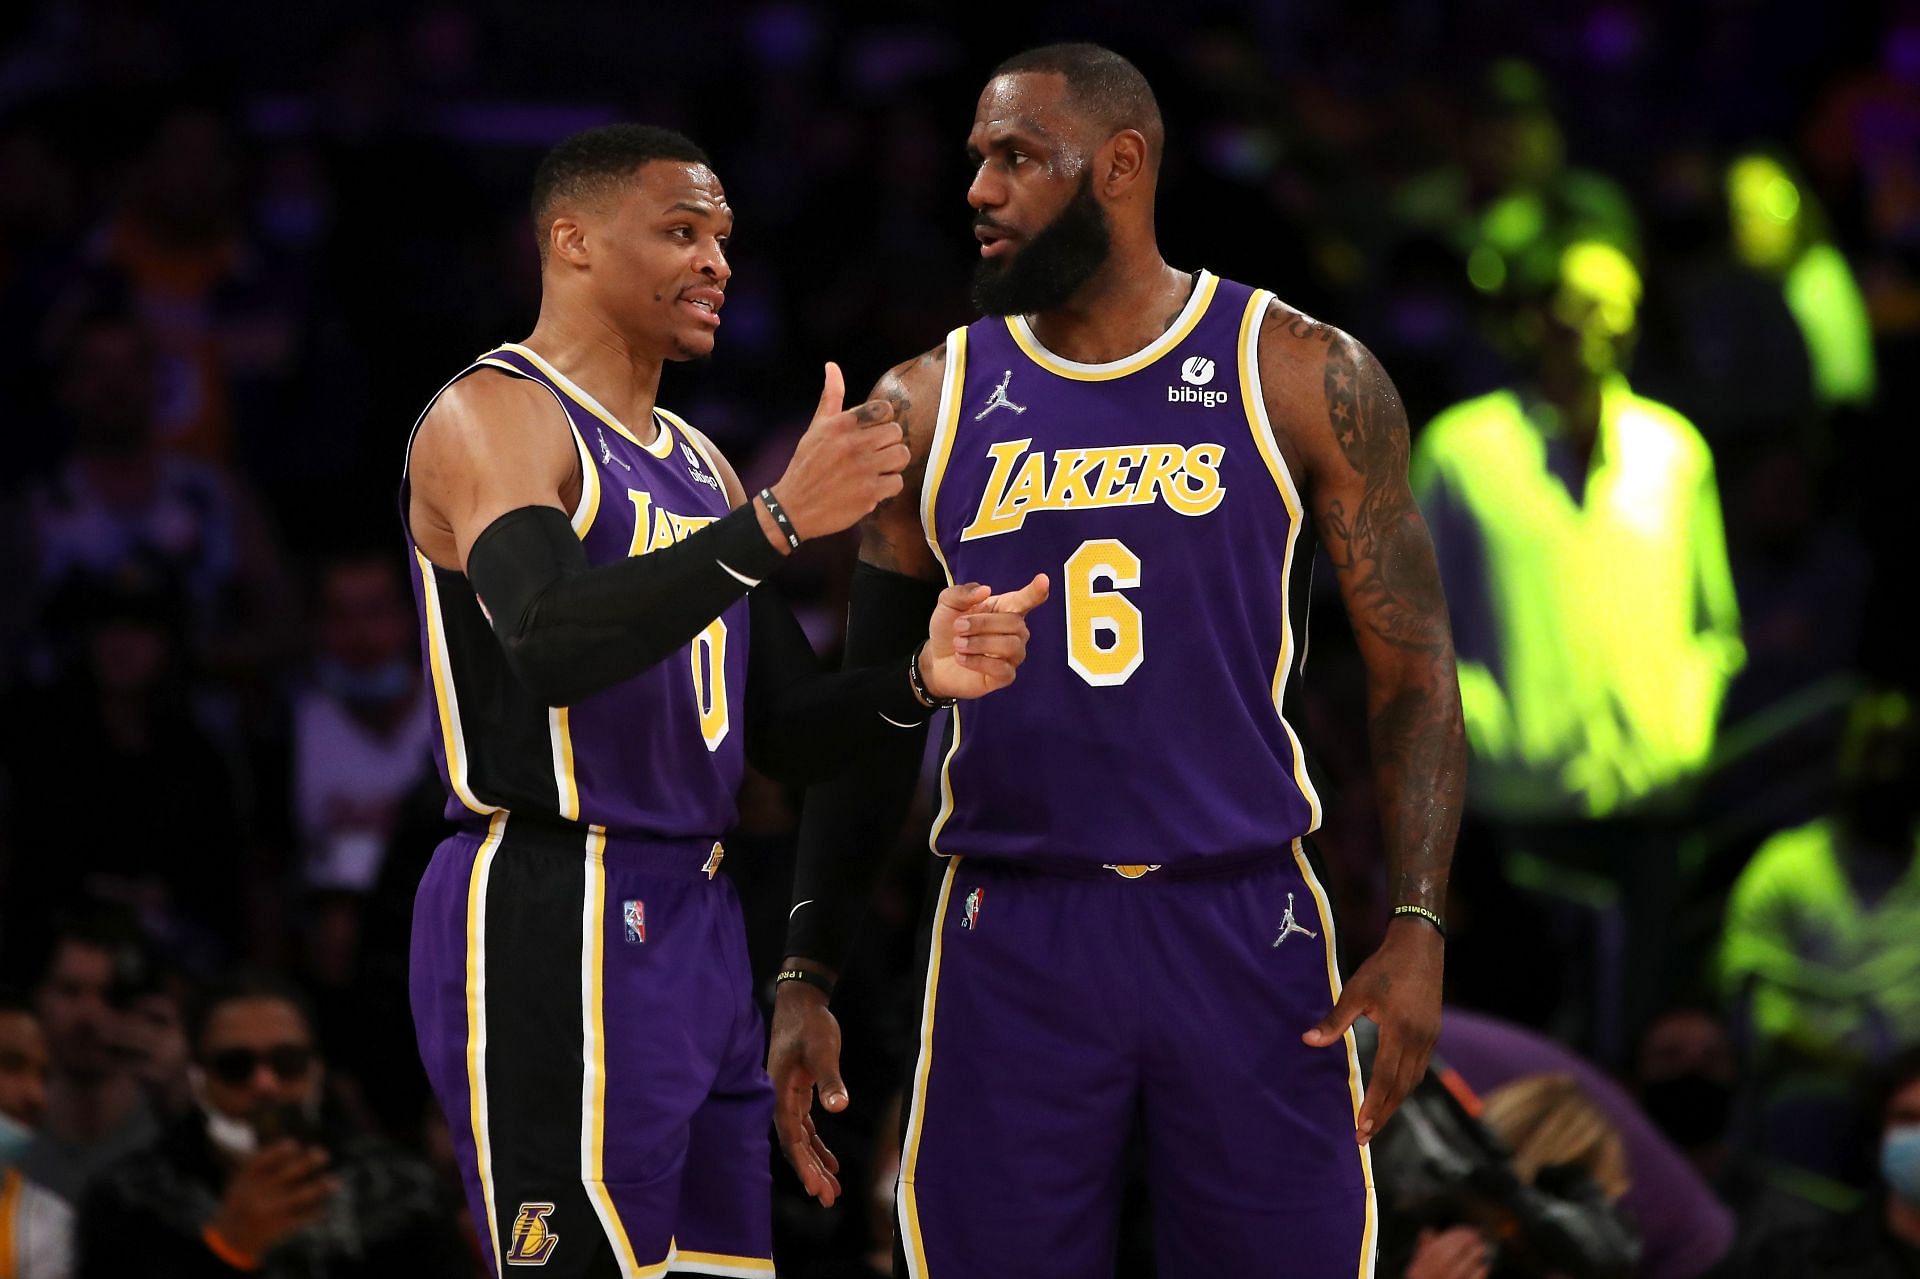 Russell Westbrook (0) and LeBron James of the LA Lakers